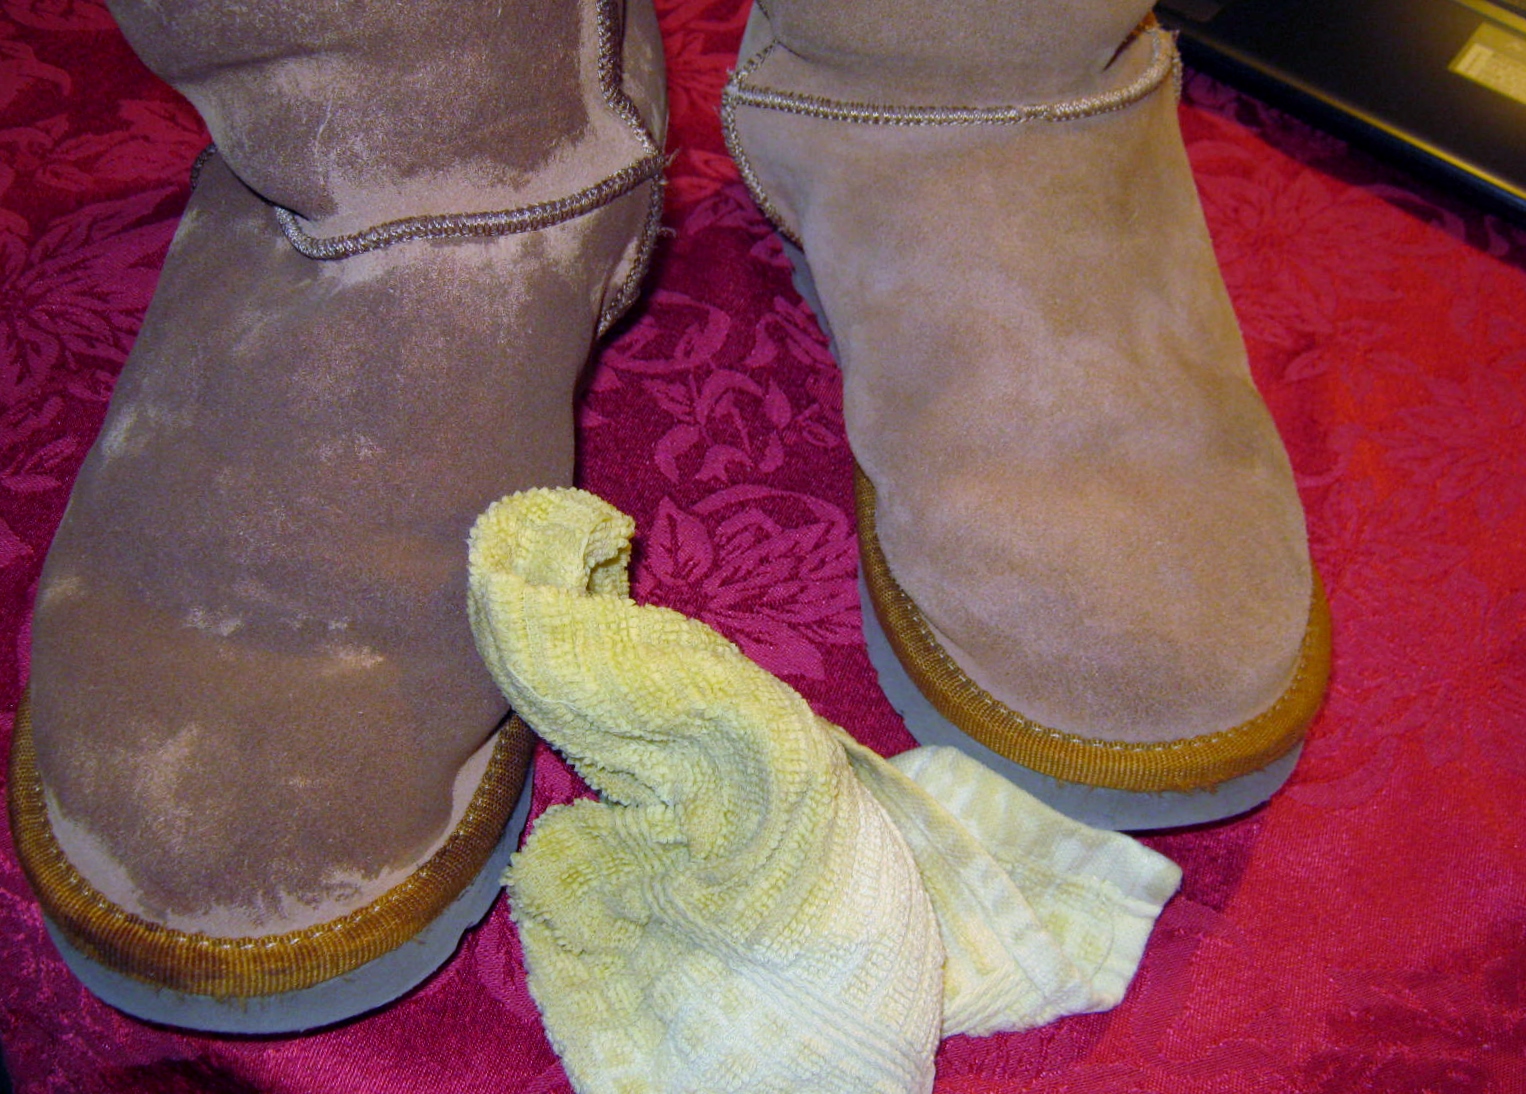 my uggs have water stains